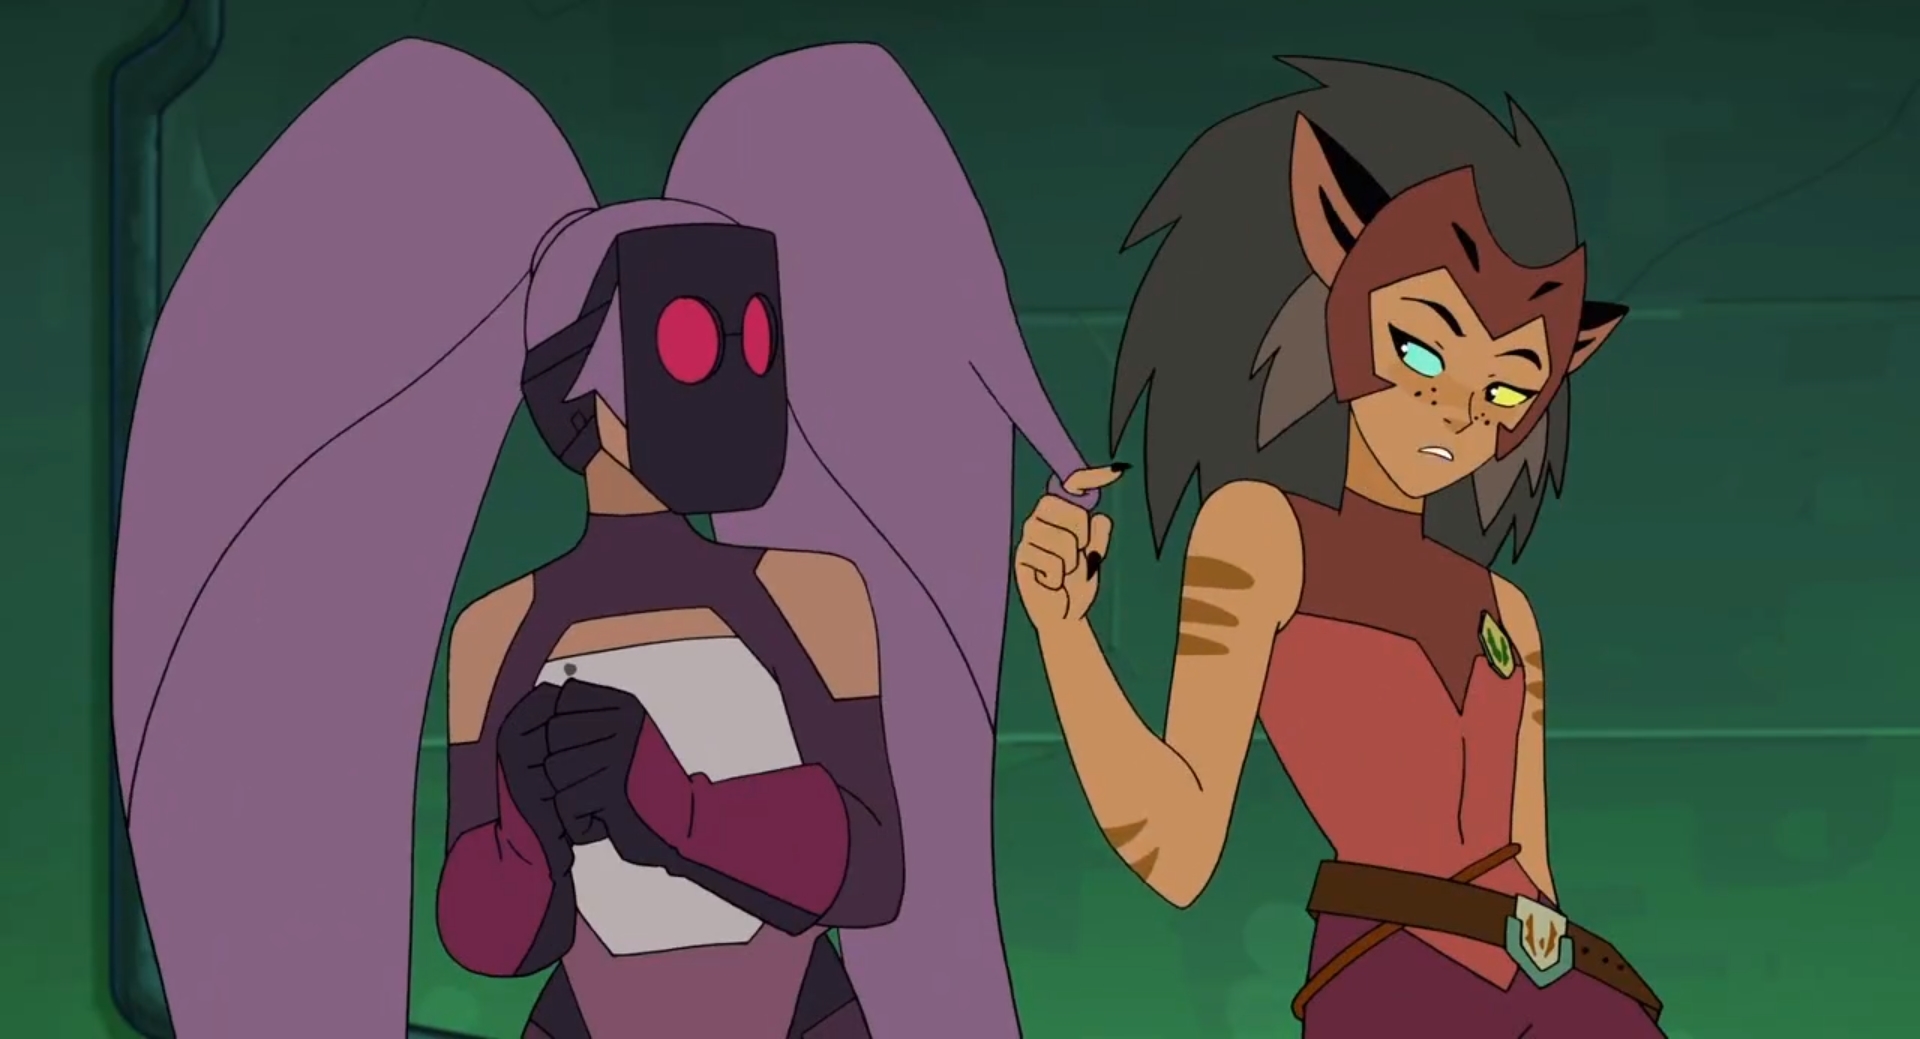 107038005. Have an image of a scene between Entrapta and Catra with strong ...